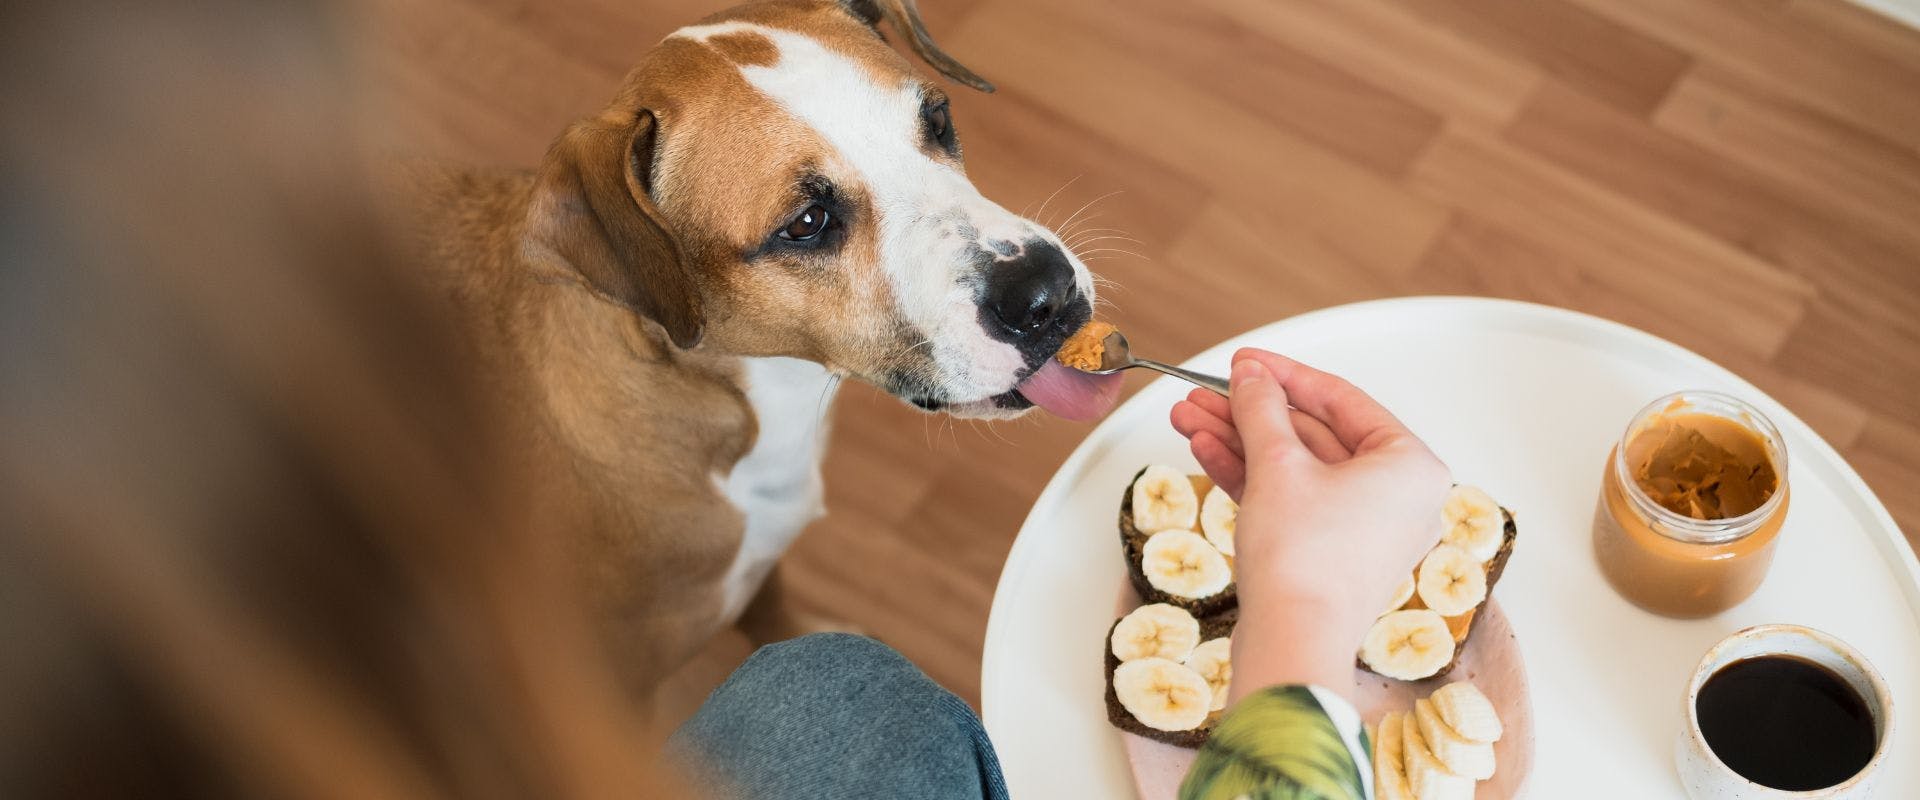 Dog sniffing at a plate of banana on toast and licking a spoon